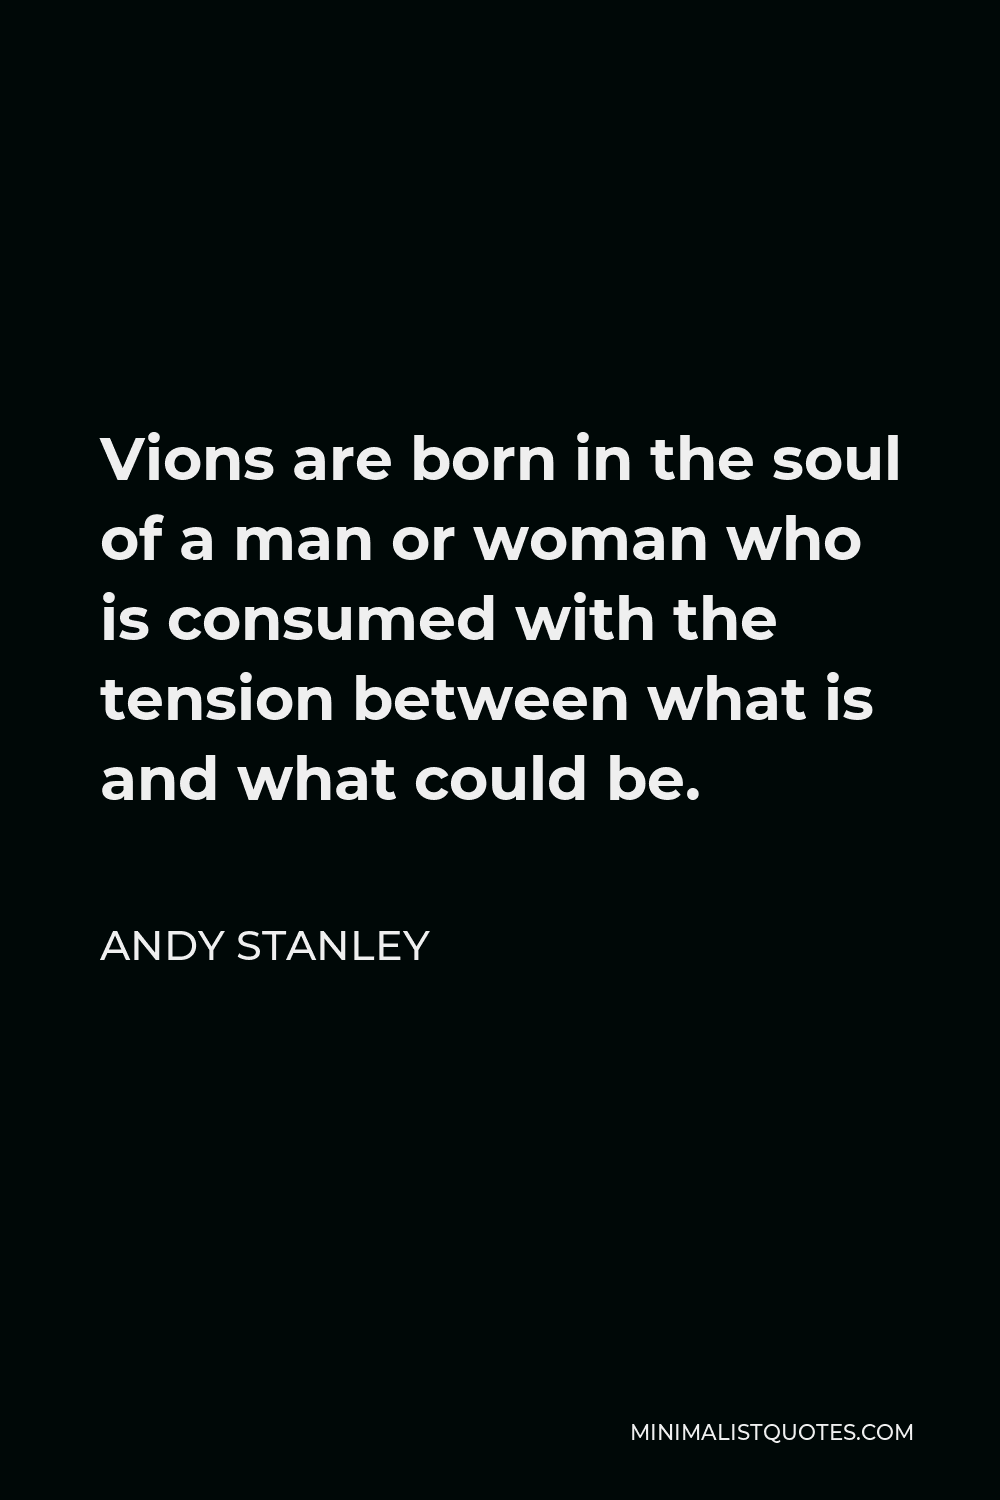 Andy Stanley Quote - Vions are born in the soul of a man or woman who is consumed with the tension between what is and what could be.